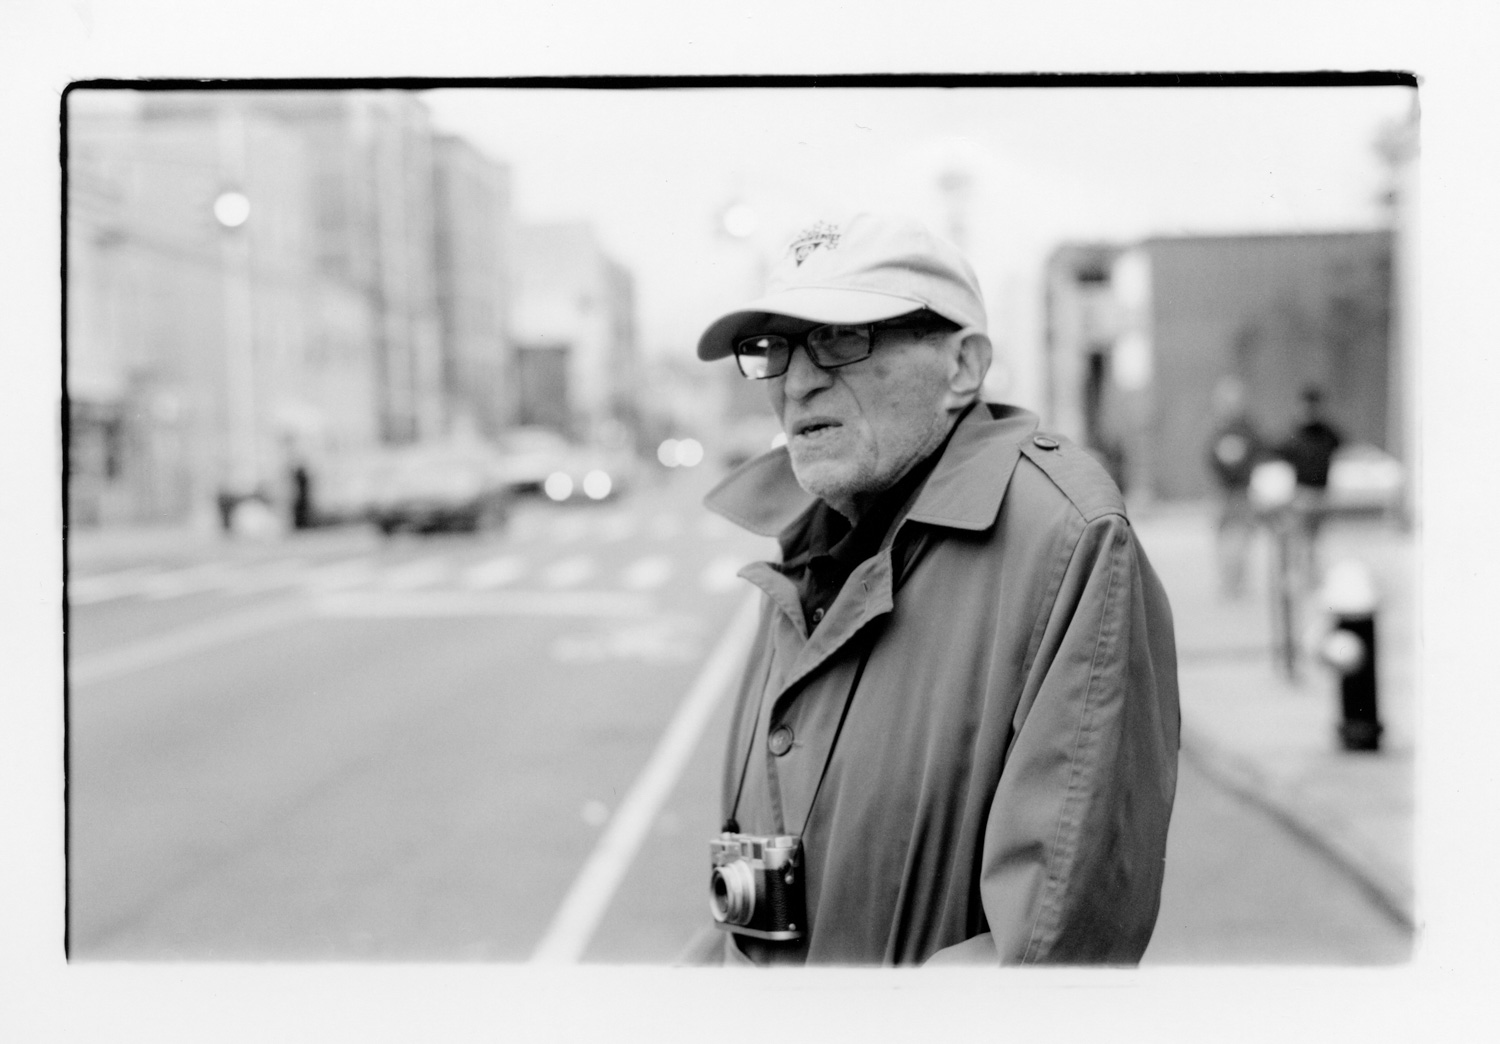 Hanging out with the one and only Tony Vaccaro on Fujifilm NEOPAN 100 ACROS